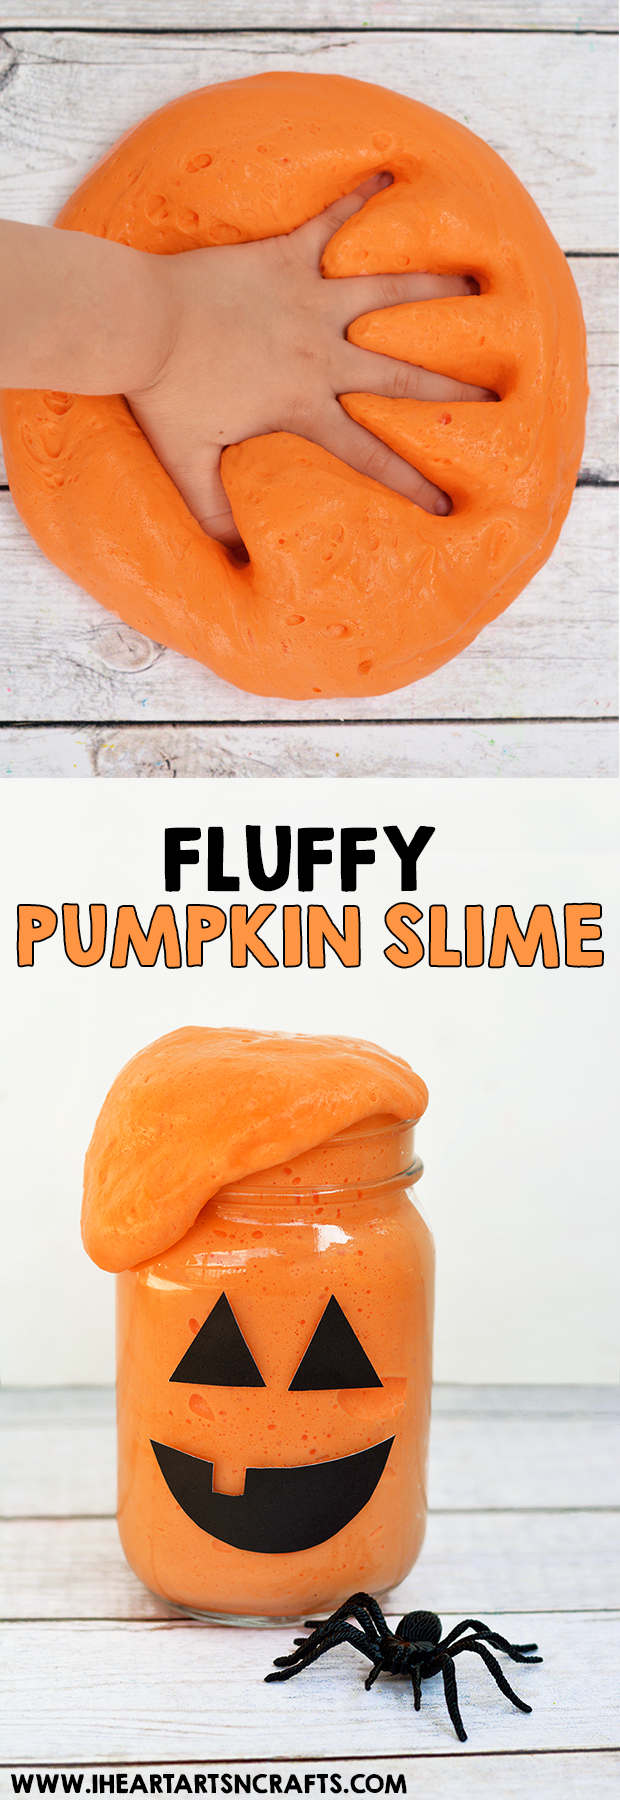 FLUFFY PUMPKIN SLIME  made with @elmersproducts glue…Soo fun! And the jack-o-lantern jars make these the perfect Halloween party